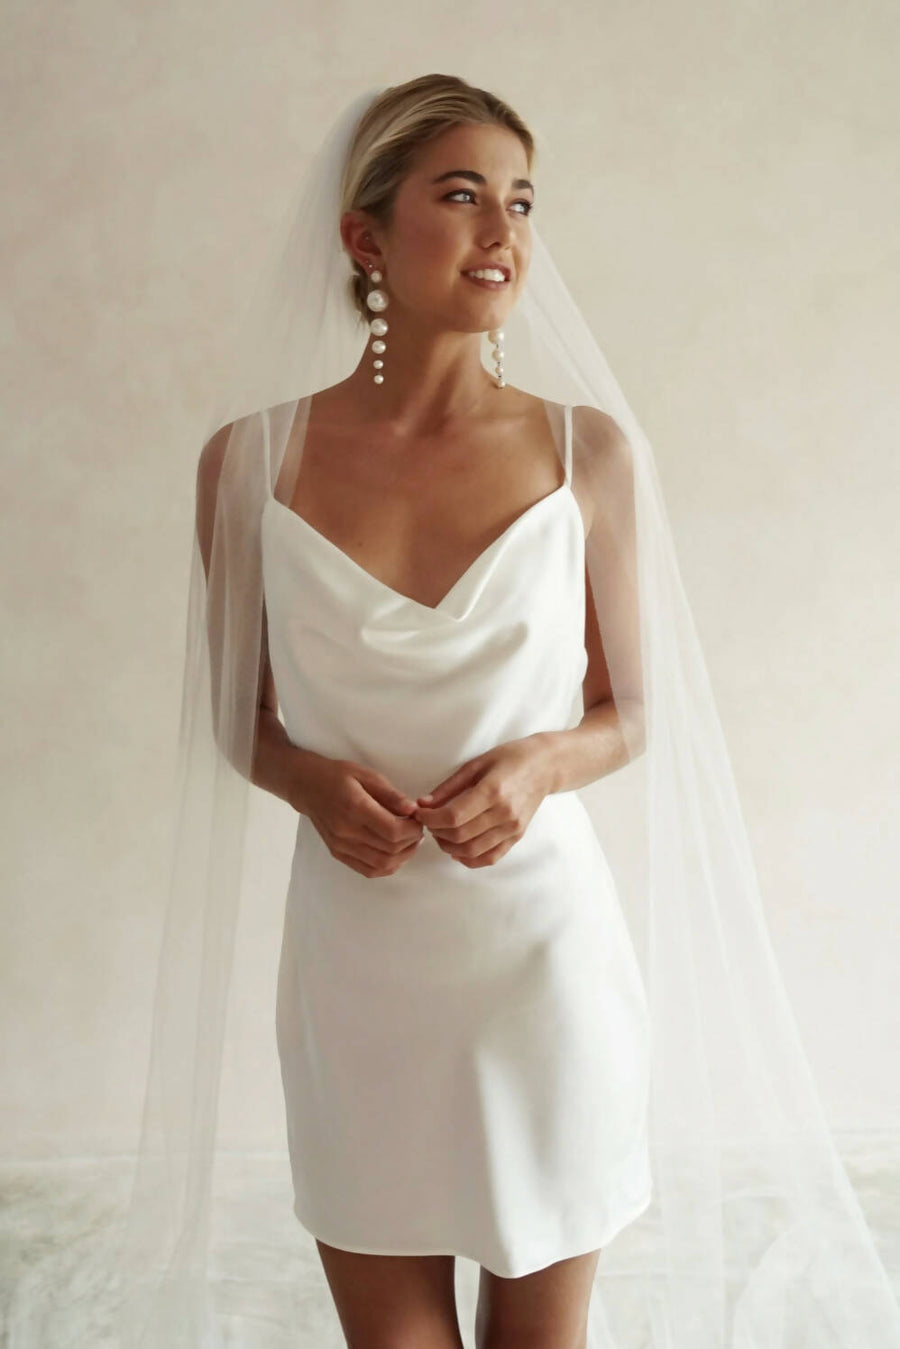 TO HAVE AND TO HOLD I | One Tier Embroidered Veil in Cathedral Length